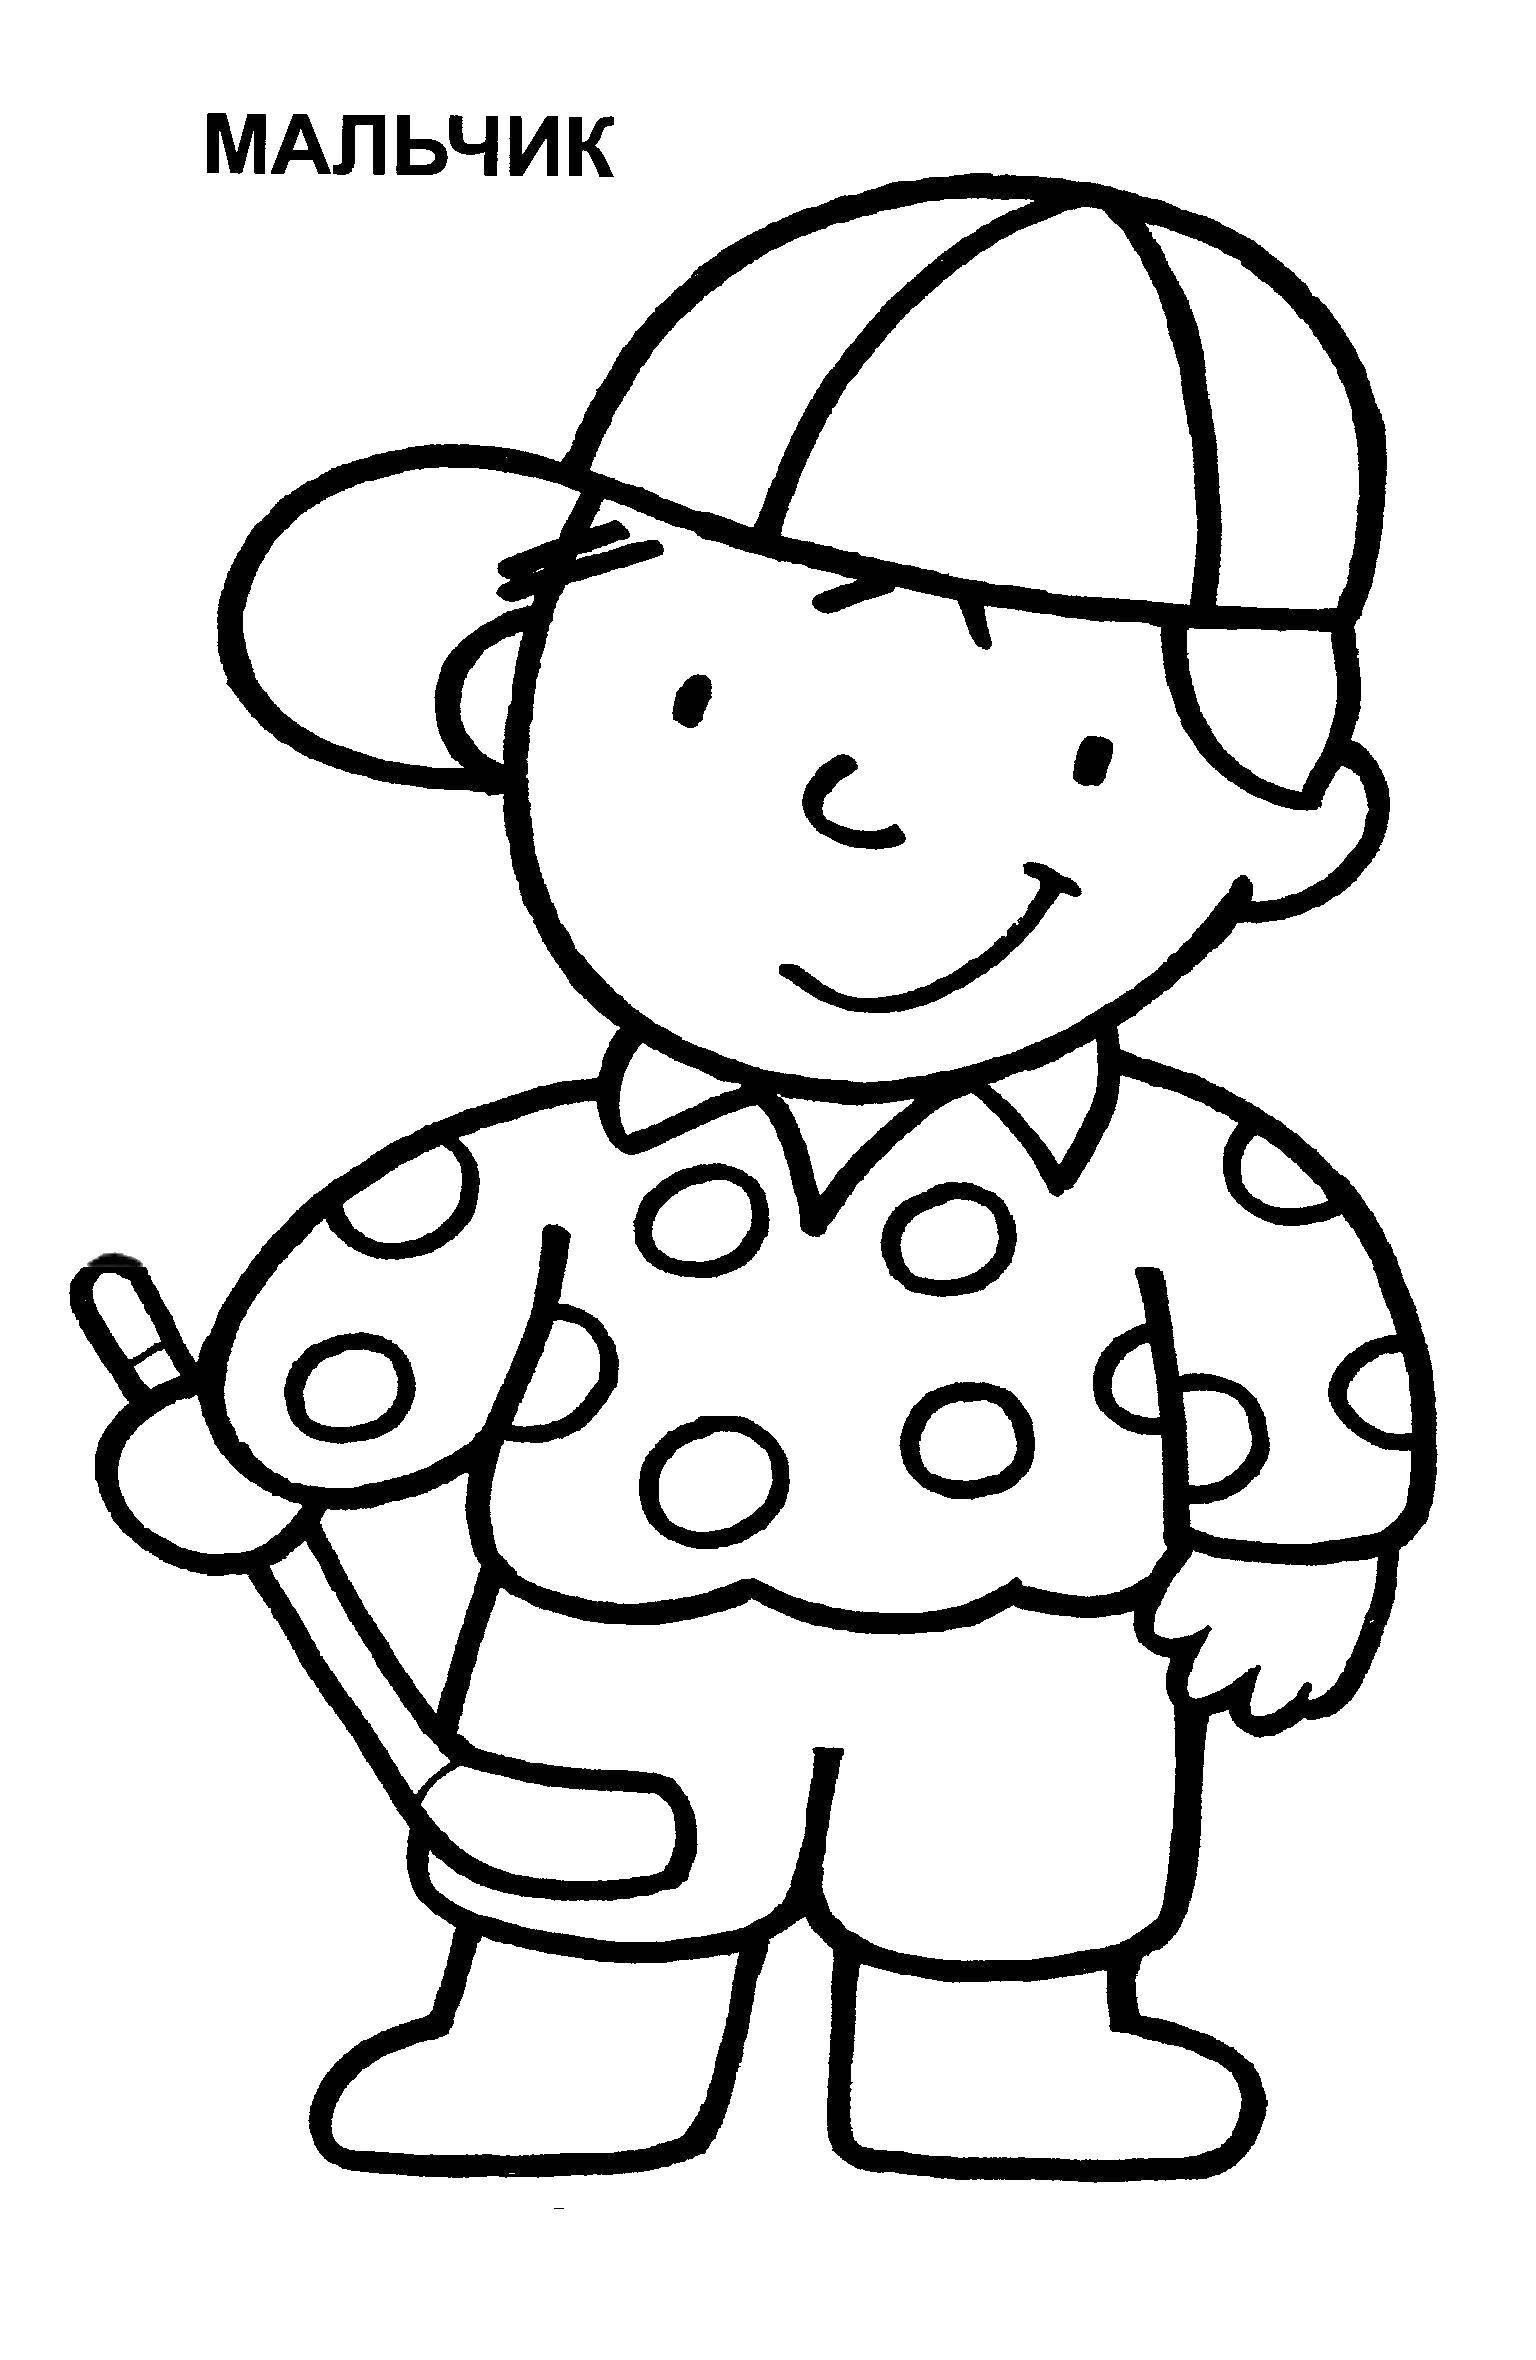 Coloring Boy. Category Coloring pages for kids. Tags:  Boy.